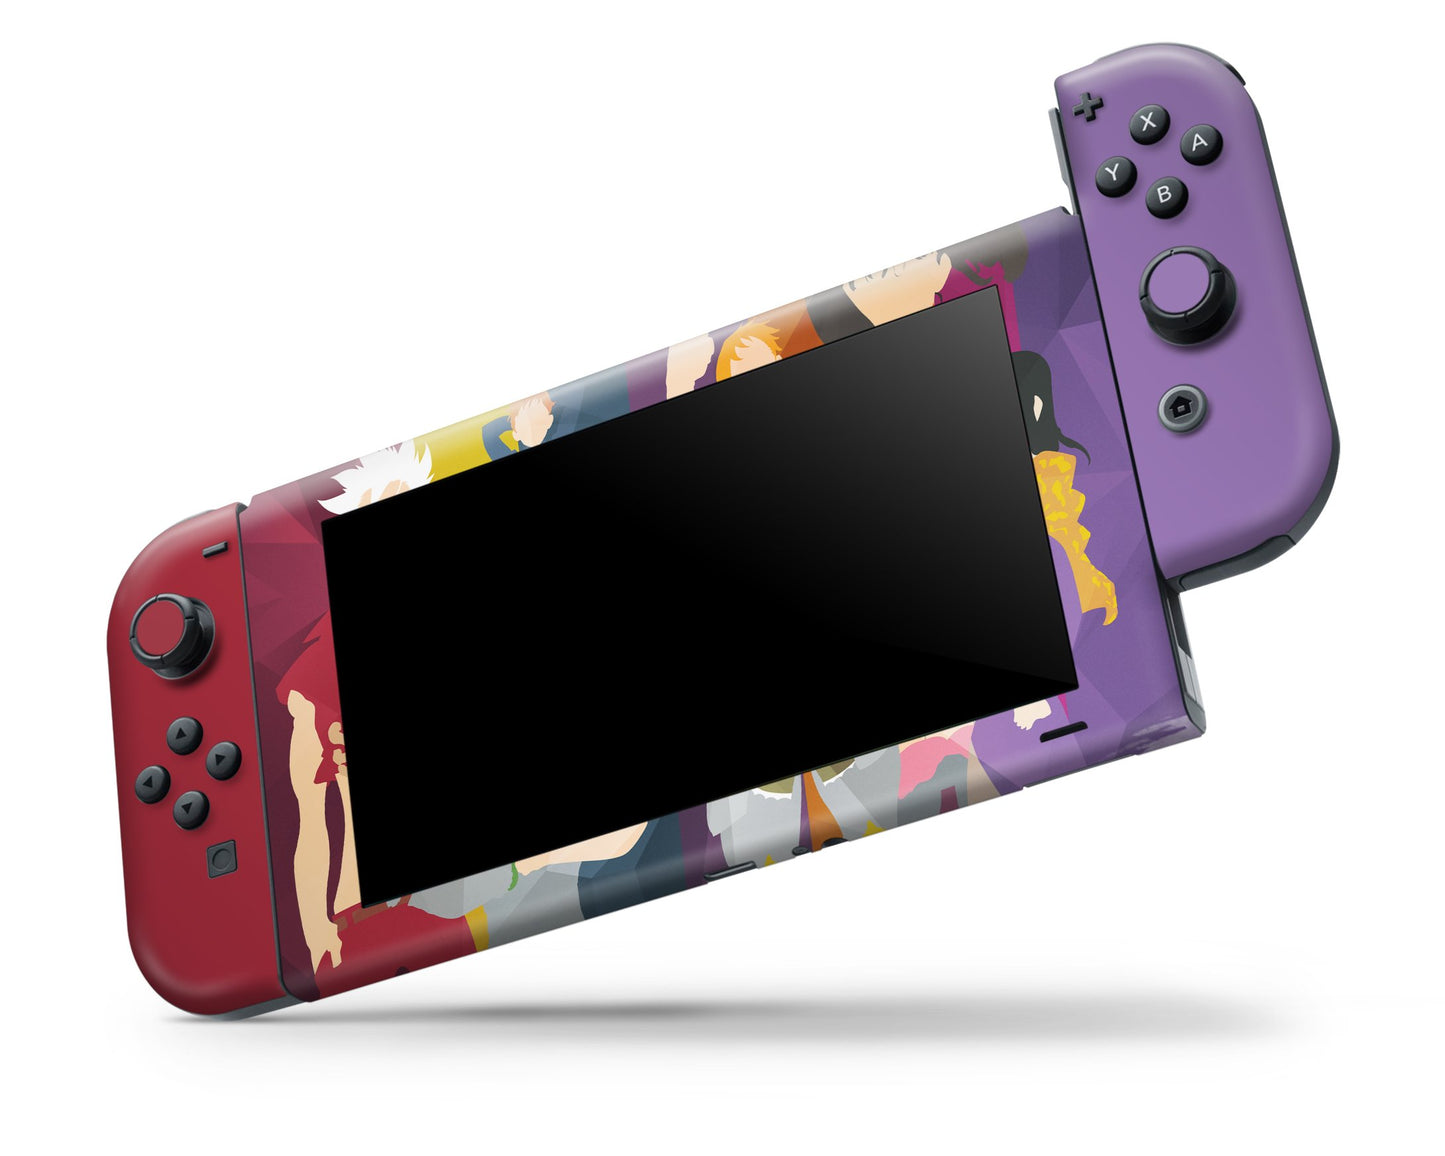 Anime Town Creations Nintendo Switch The Seven Deadly Sins Minimalist Vinyl +Tempered Glass Skins - Anime The Seven Deadly Sins Skin